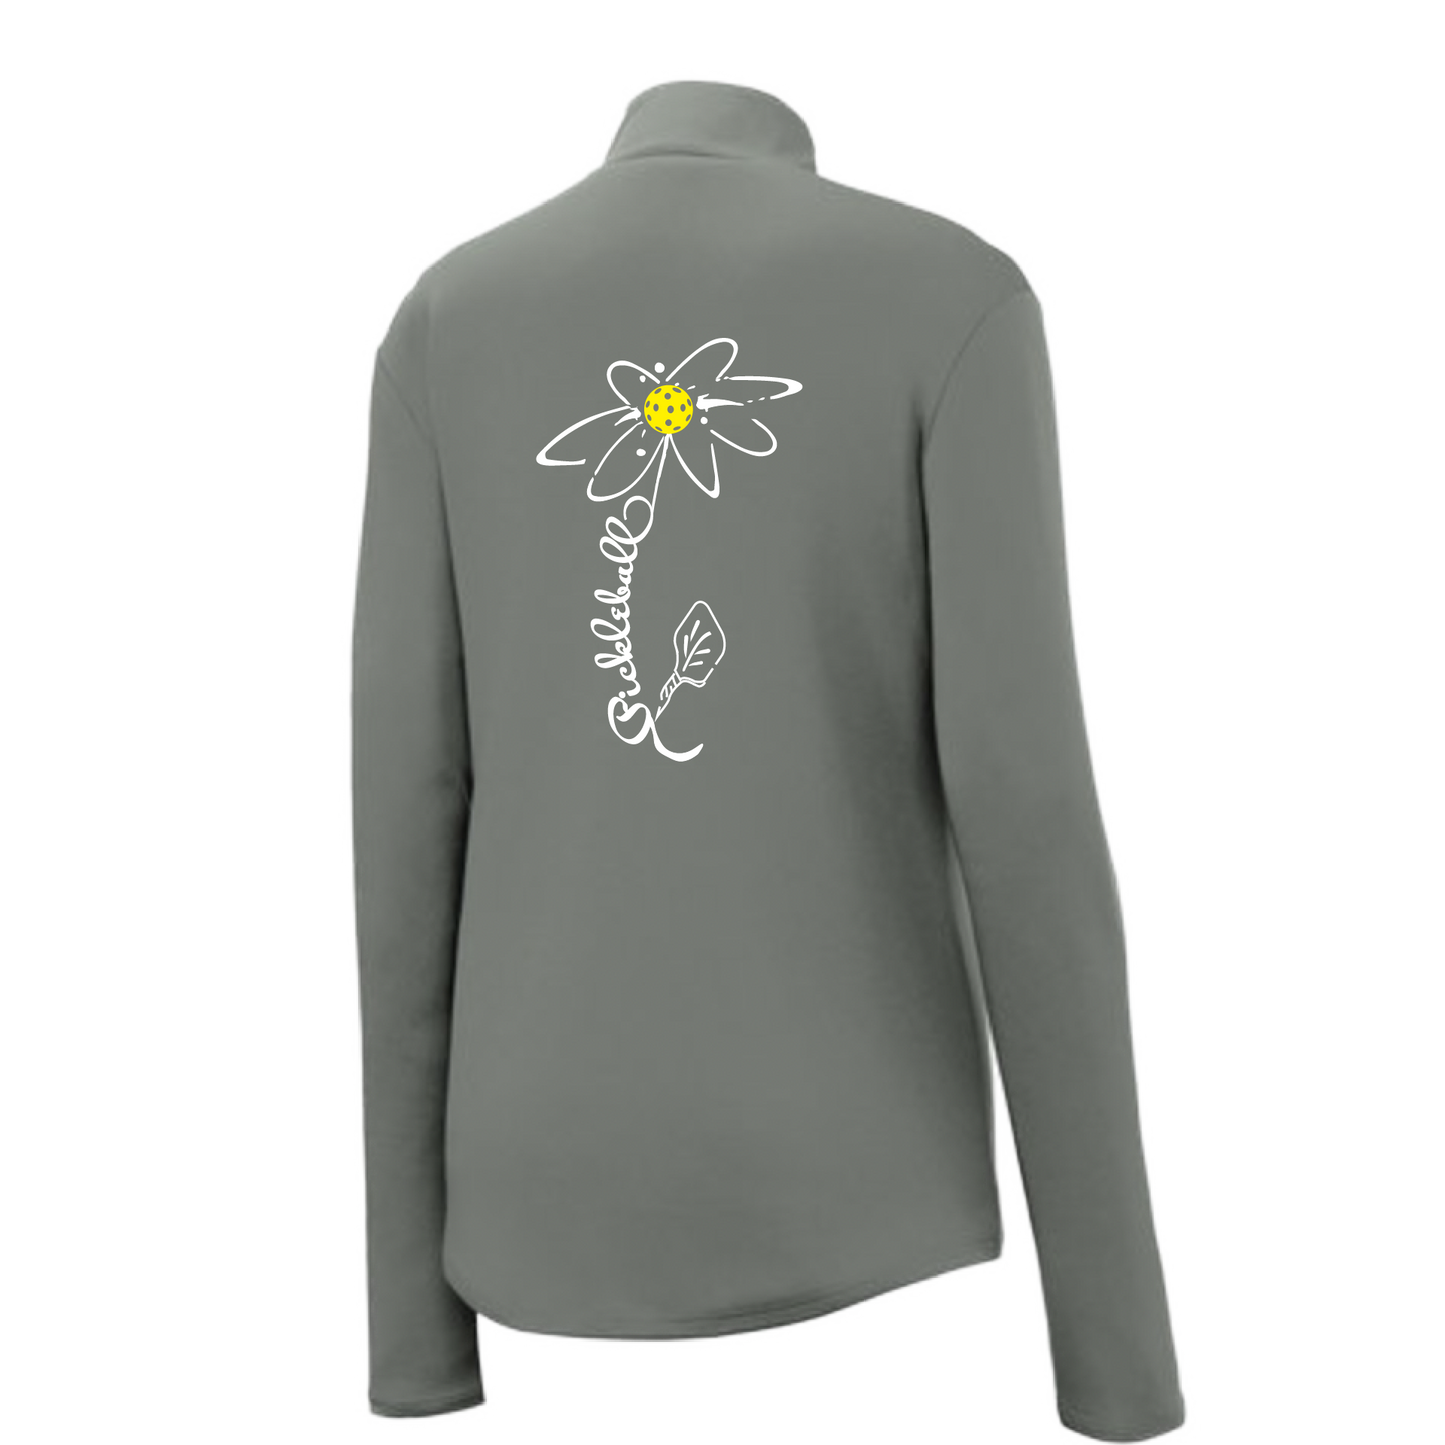 Pickleball Design: Pickleball Flower  Women's 1/4-Zip Pullover: Princess seams and drop tail hem.  Turn up the volume in this Women's shirt with its perfect mix of softness and attitude. Material is ultra-comfortable with moisture wicking properties and tri-blend softness. PosiCharge technology locks in color. Highly breathable and lightweight. Versatile enough for wearing year-round.